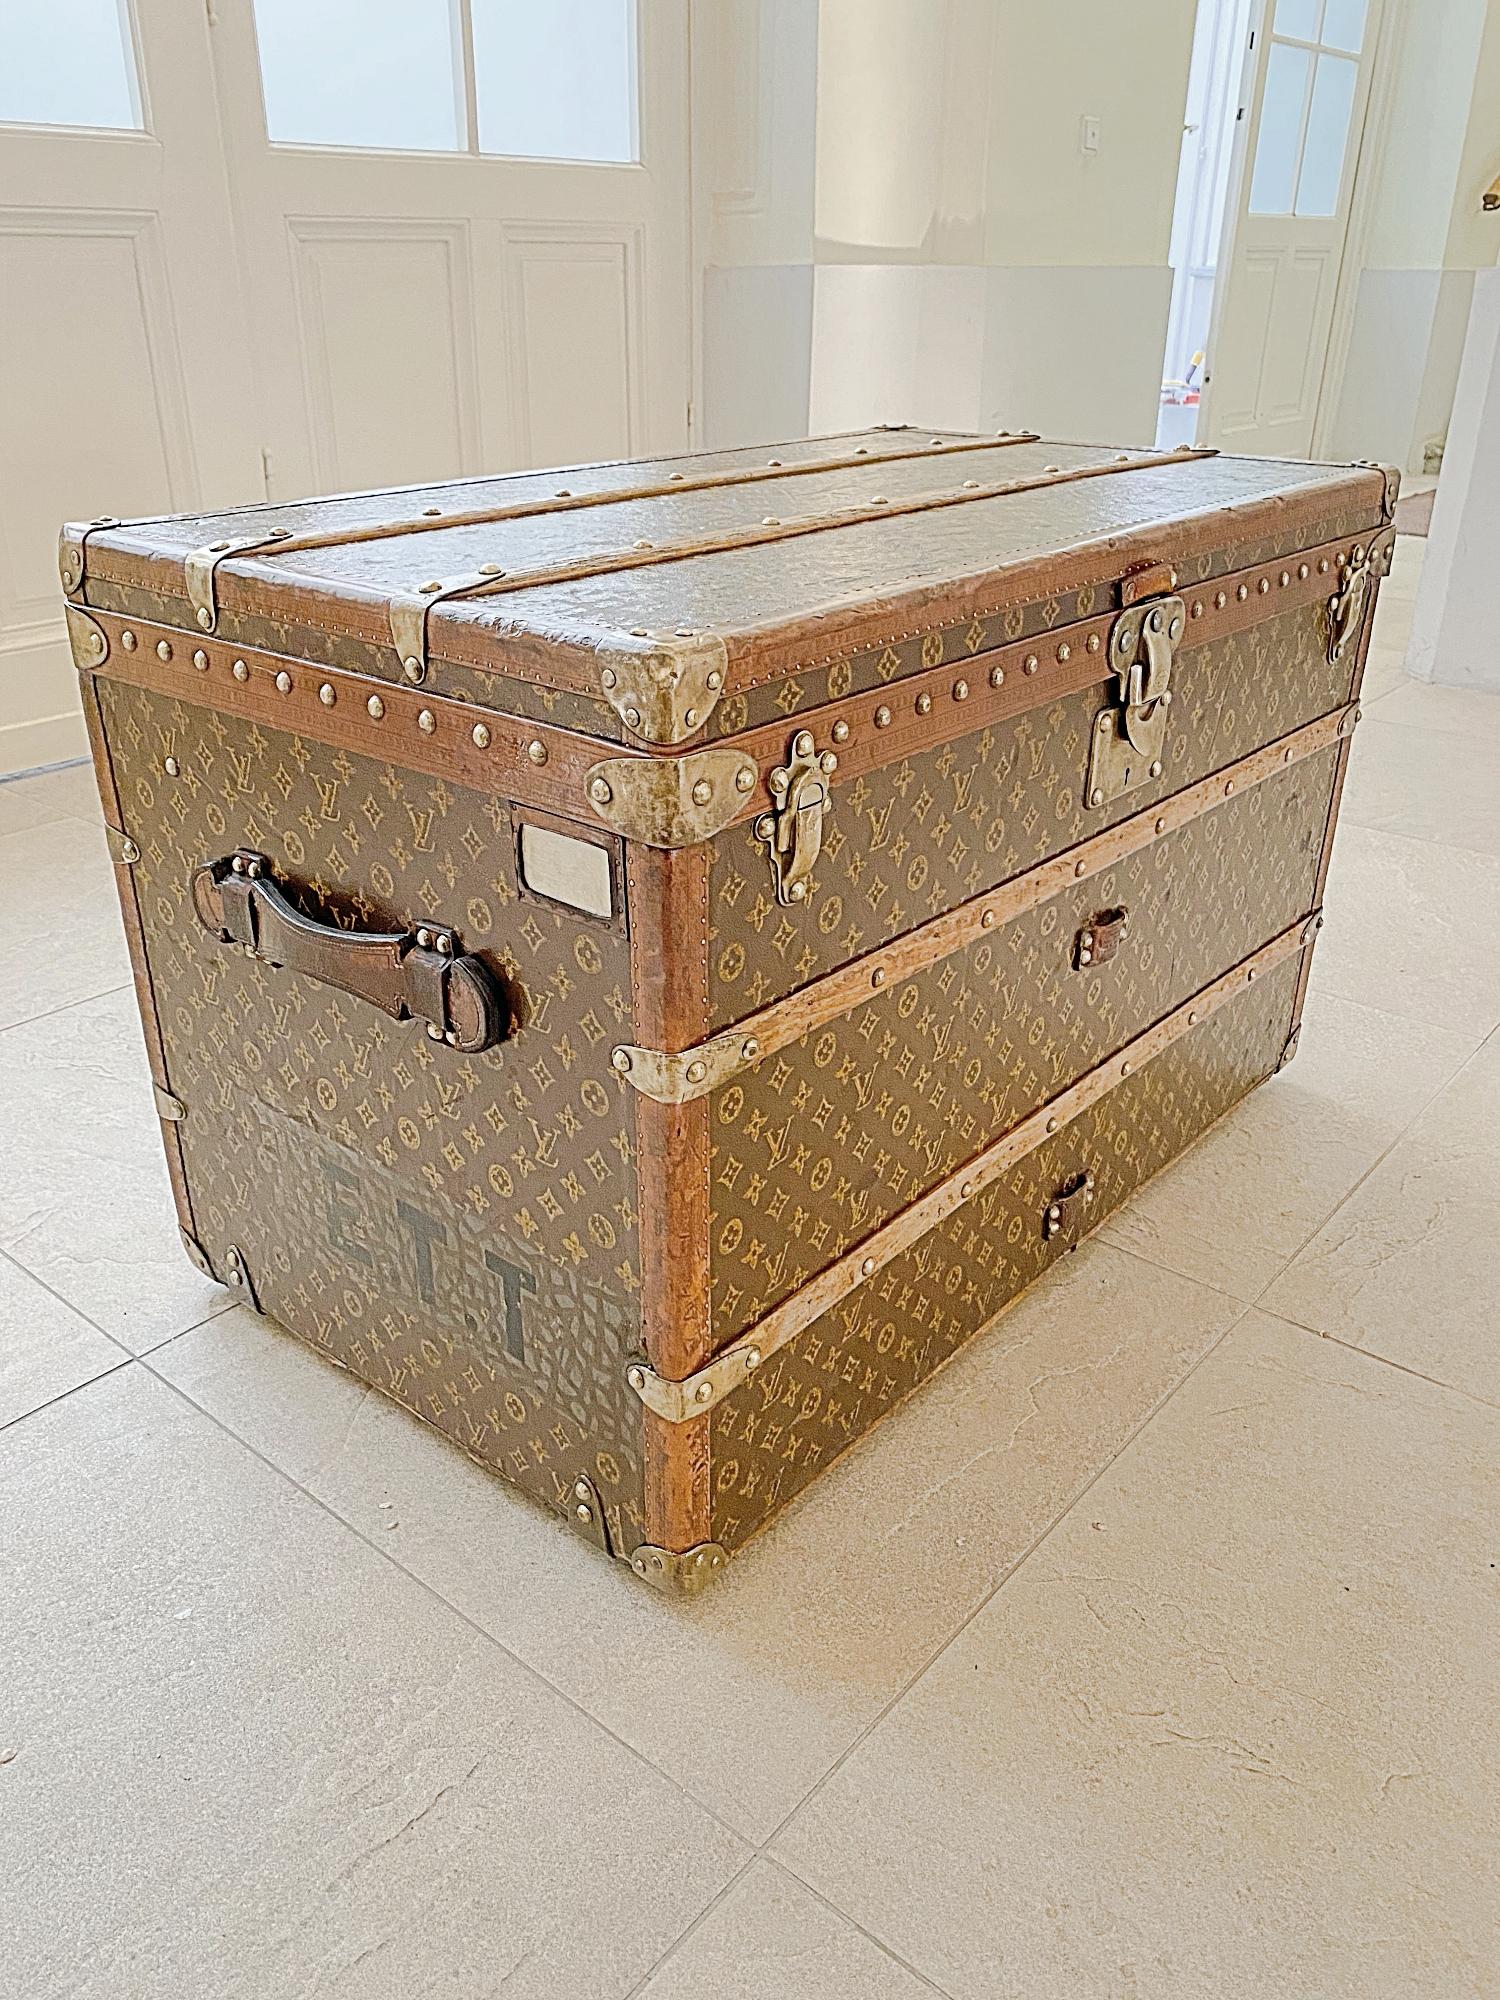 Belle Époque Louis Vuitton Trunk from High Nobility House of Thurn & Taxis, 1910s, France